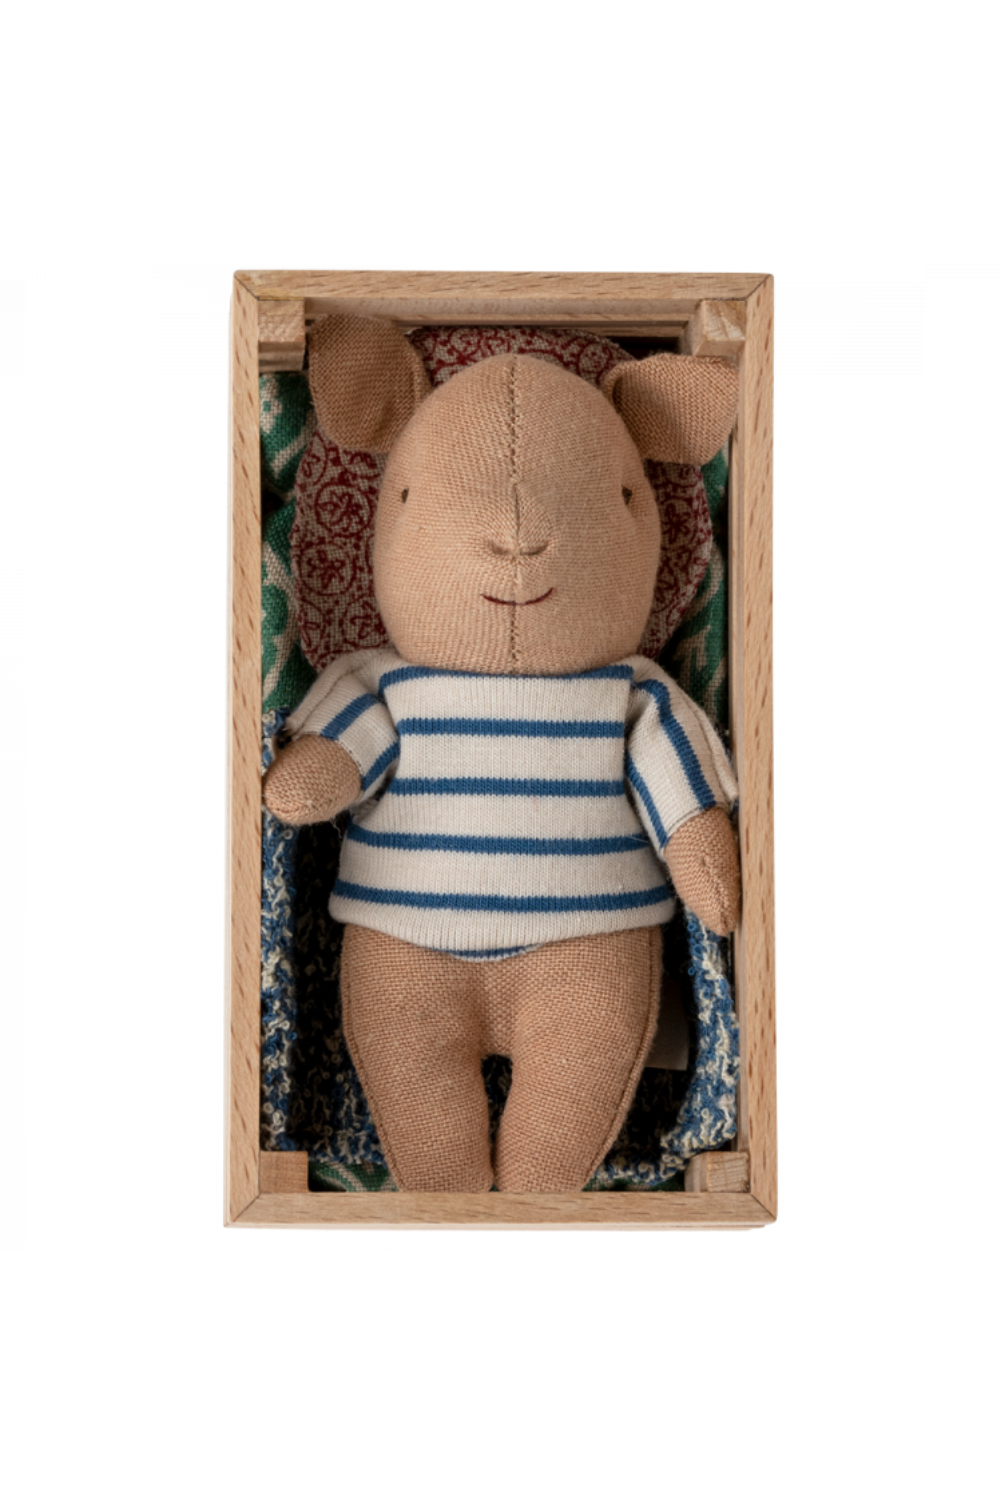 Introducing the sweet Maileg Baby Boy Pig in Box, ready to bring farmyard fun to your dollhouse adventures